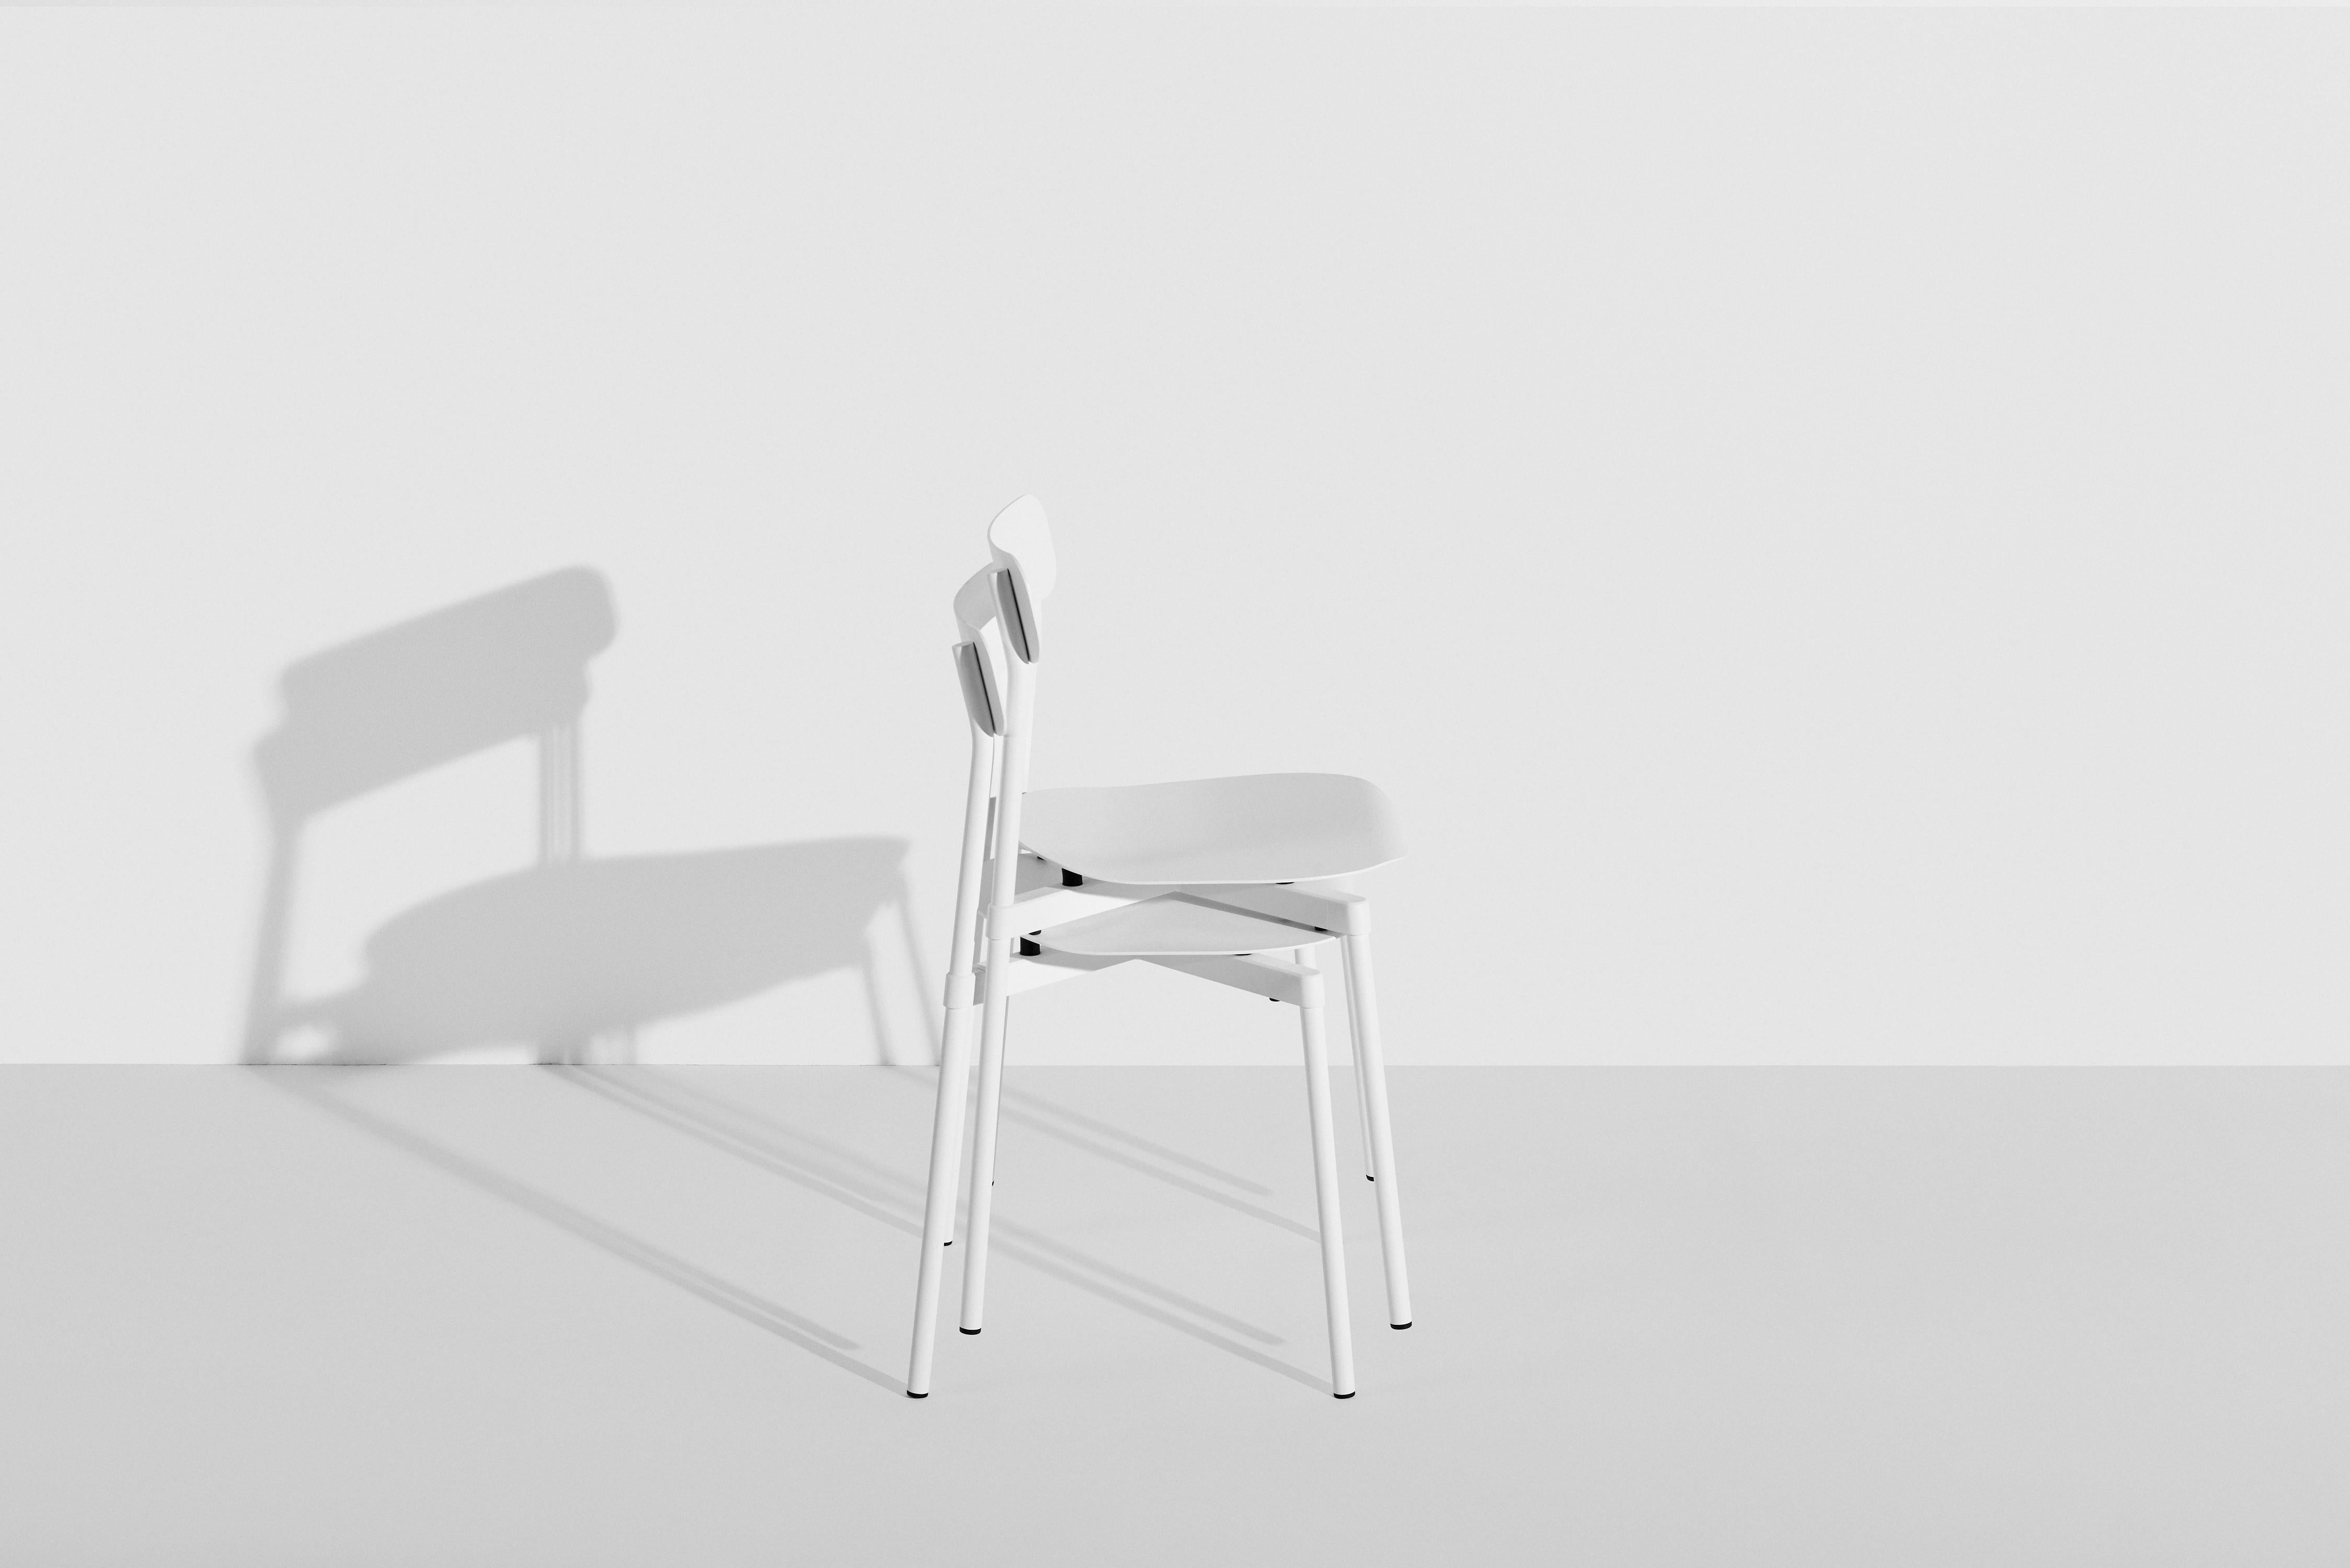 Aluminum Petite Friture Fromme Chair in White Aluminium by Tom Chung, 2019 For Sale